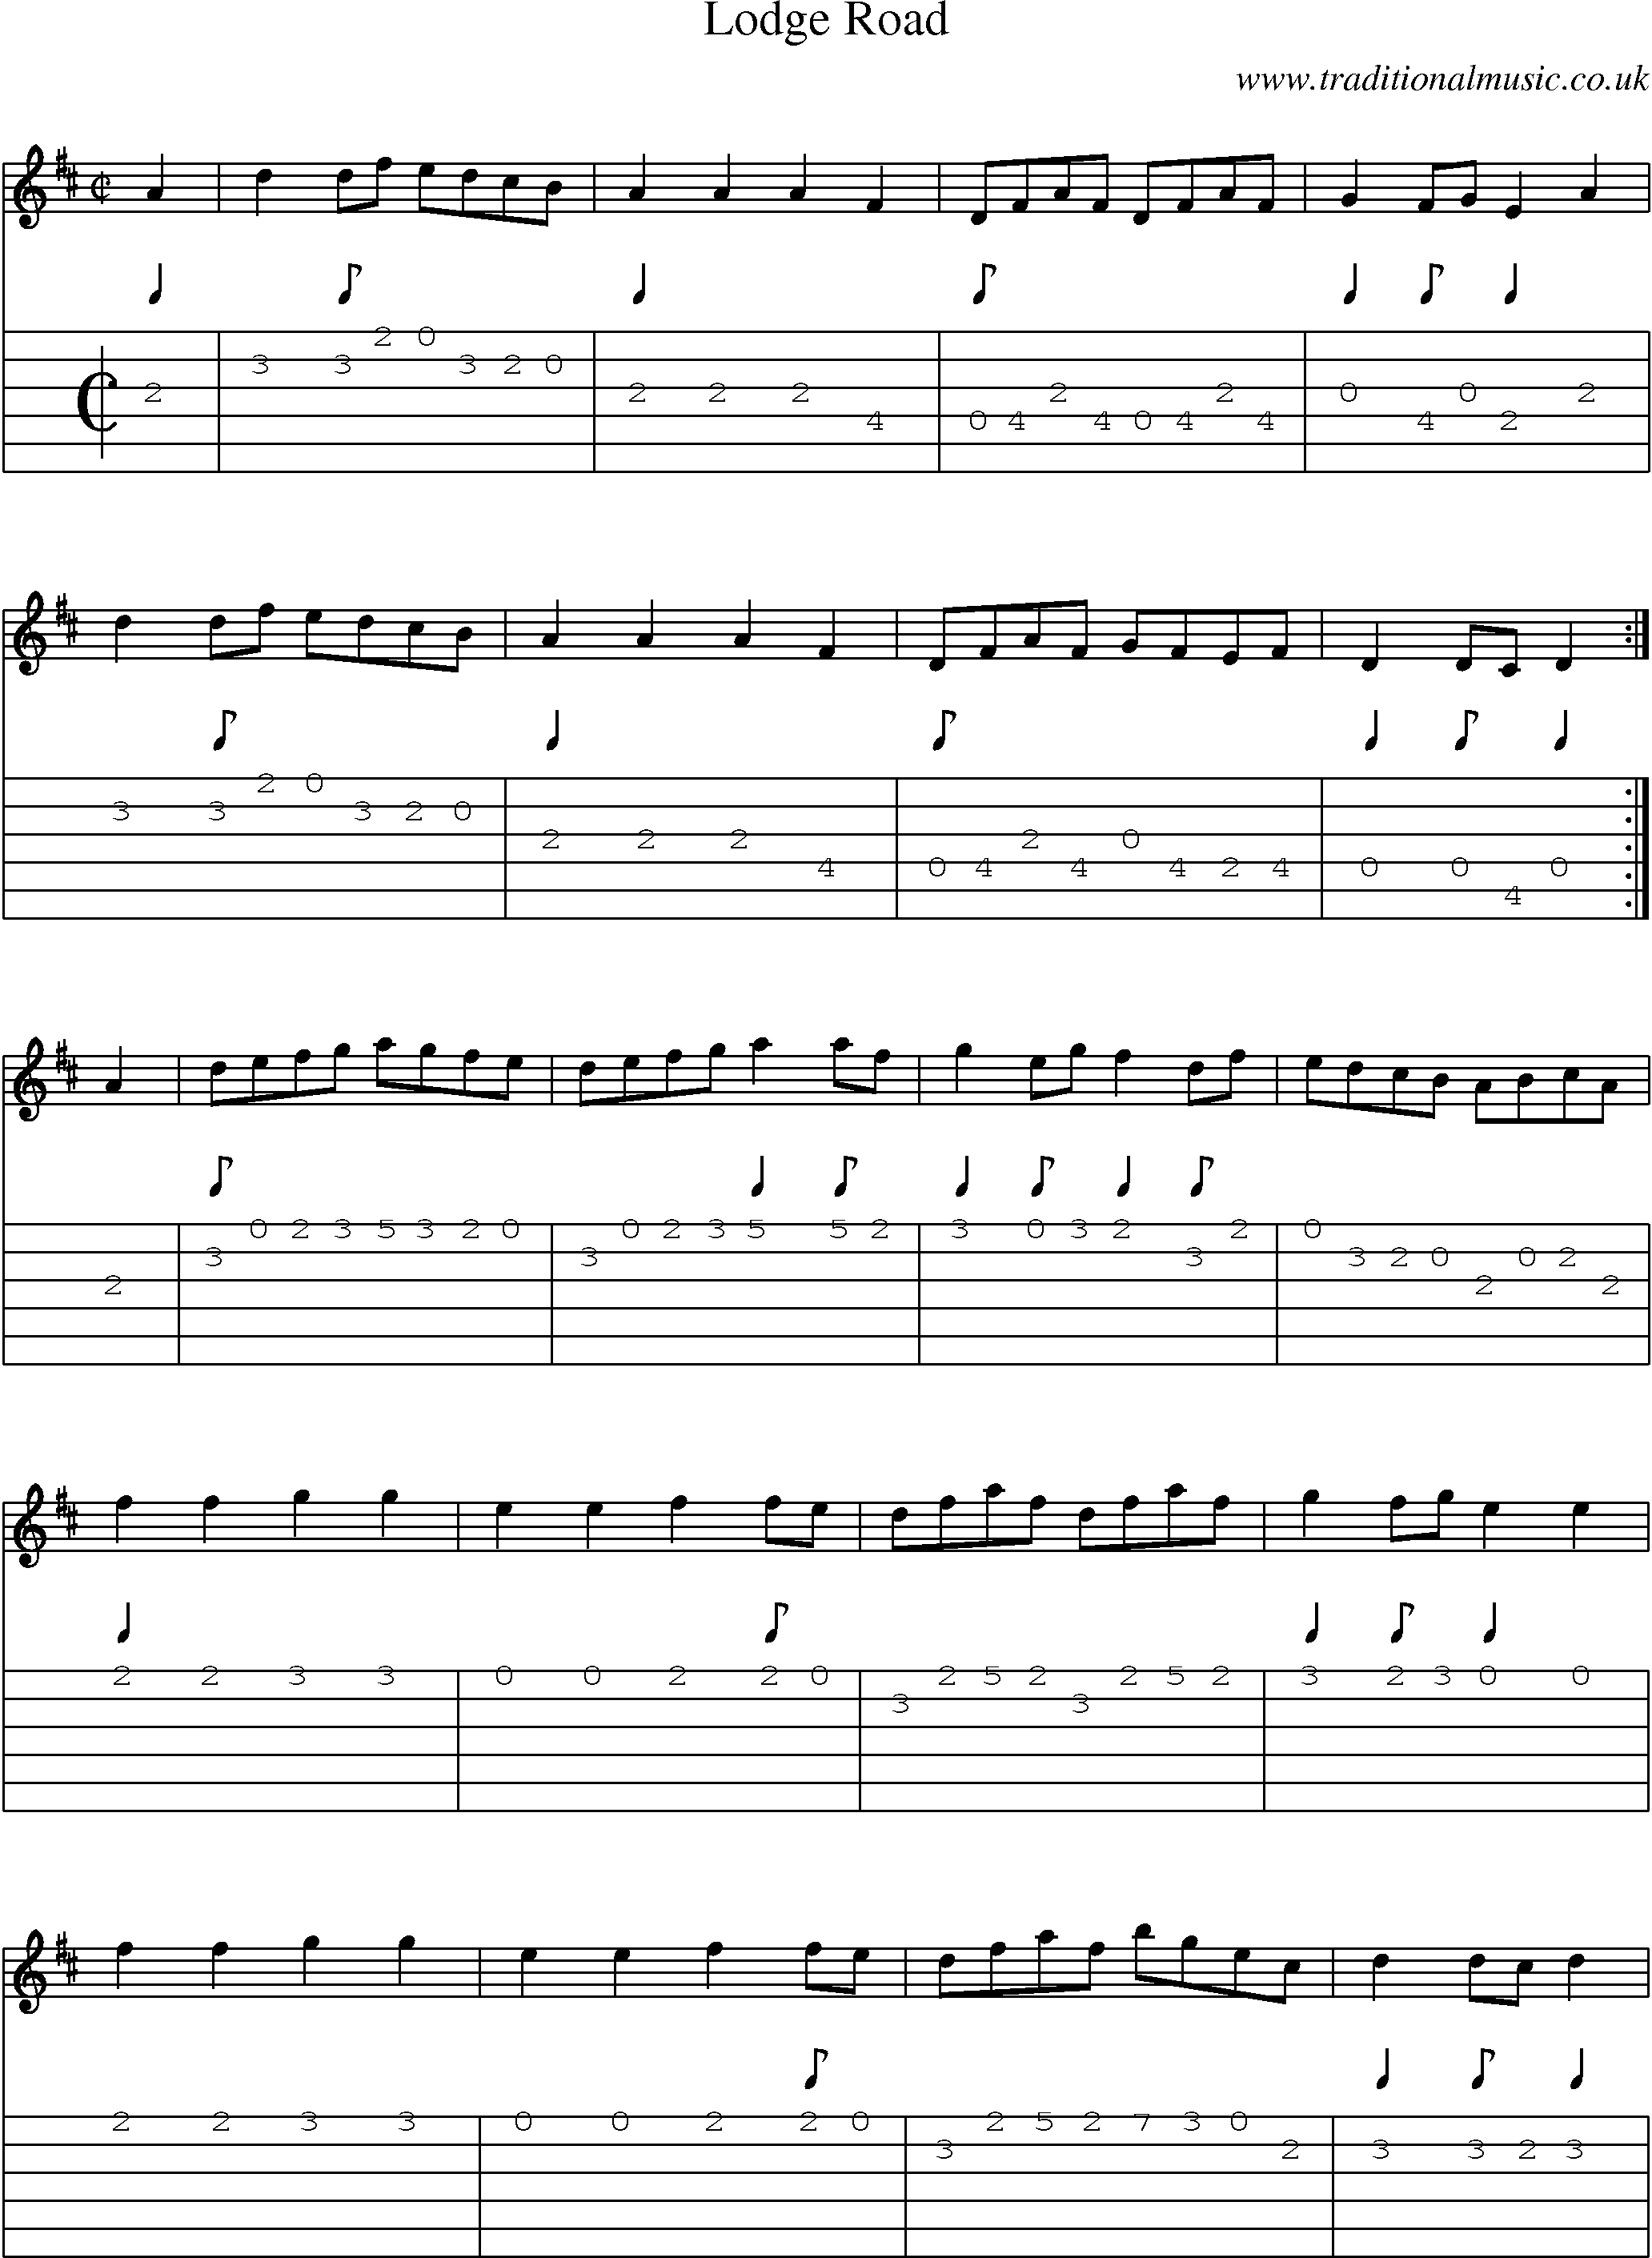 Music Score and Guitar Tabs for Lodge Road